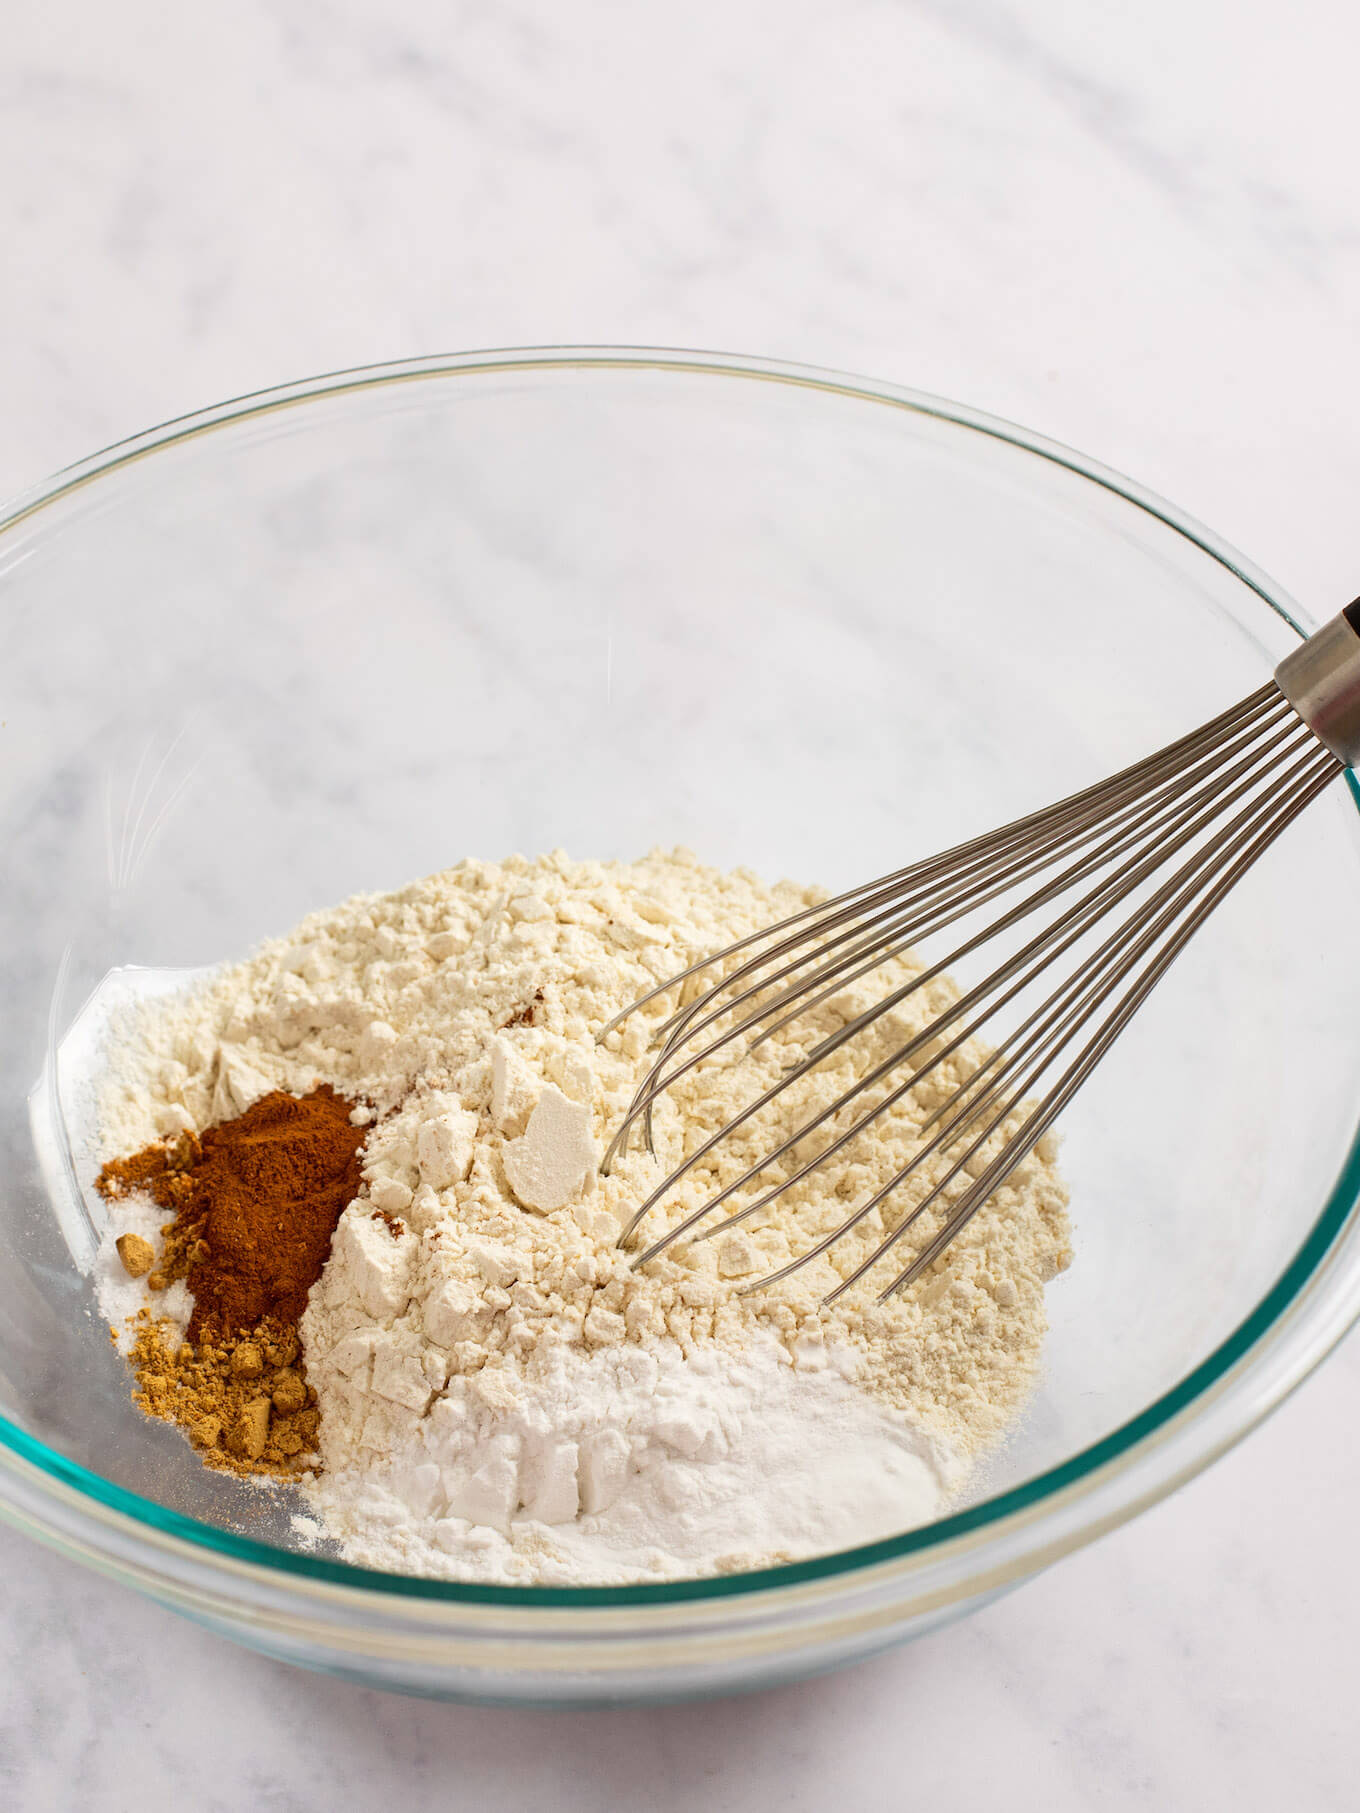 Flour, spices, baking powder, baking soda, and salt in a glass mixing bowl.